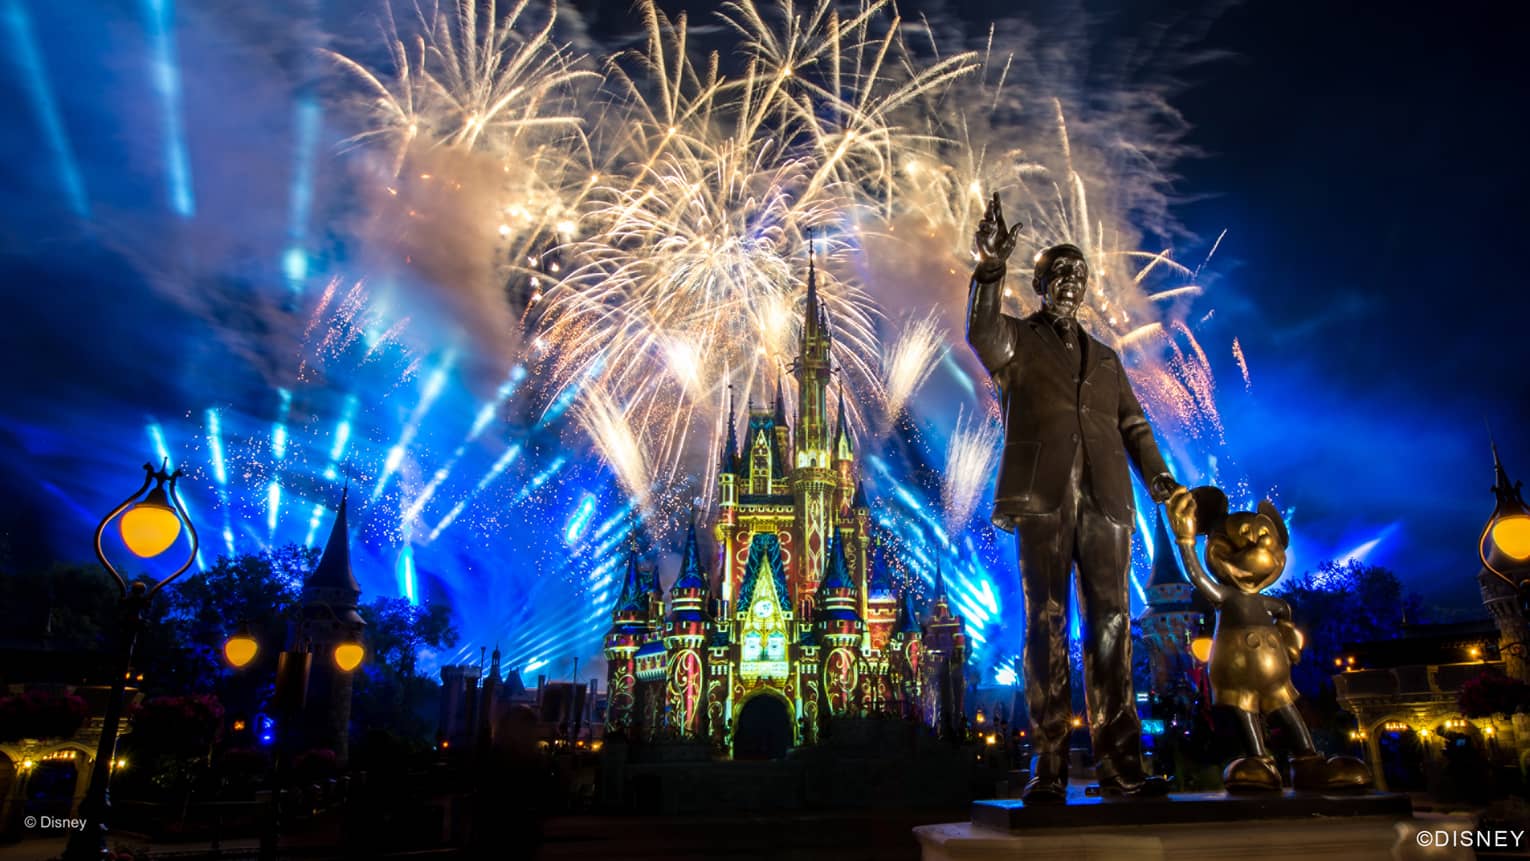 Fireworks and blue lights fill the night sky above the monument of Walt Disney at Disney world in orlando florida